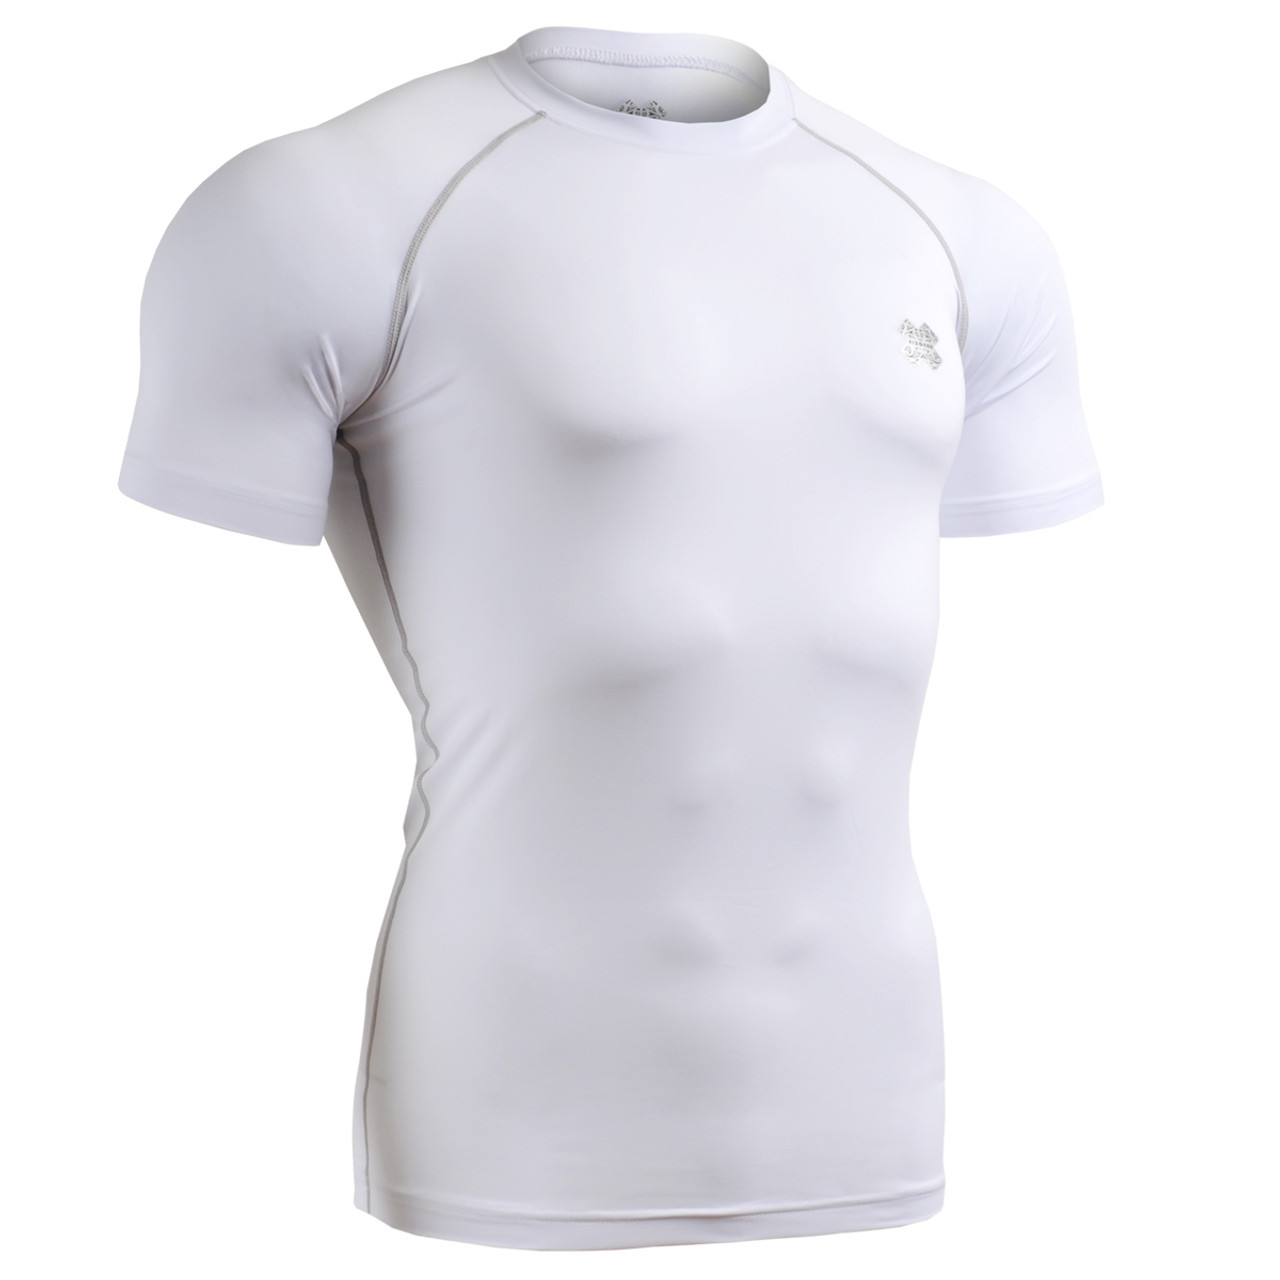 FIXGEAR CPS-WS Compression Base Layer Short Sleeve Shirt